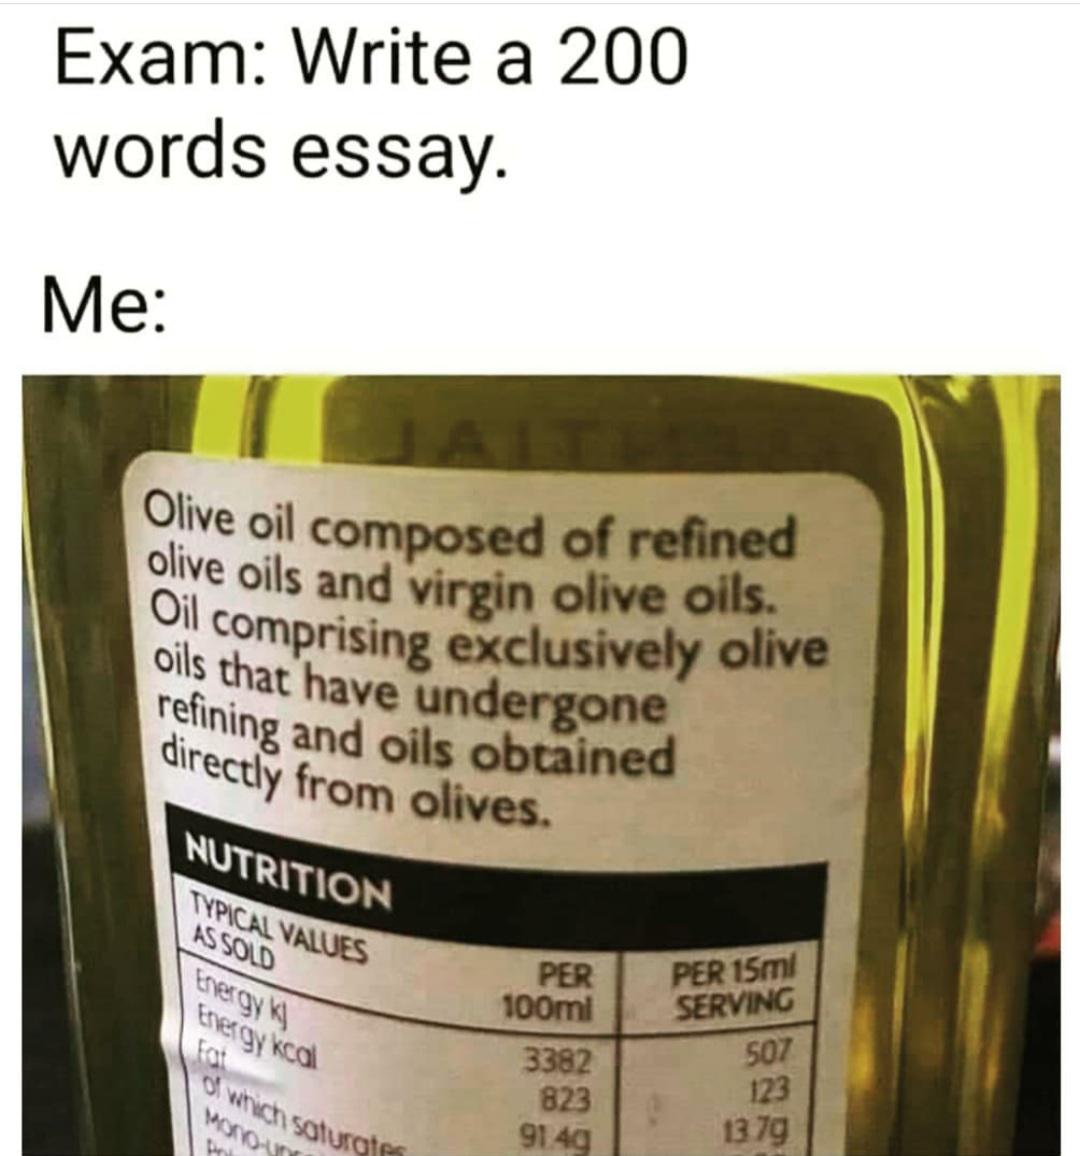 olive oil text meme - Oil comprising exclusively olive Exam Write a 200 words essay. Me Olive oil composed of refined olive oils and virgin olive oils. oils that have undergone refining and oils obtained directly from olives. Nutrition Typical Values Asso